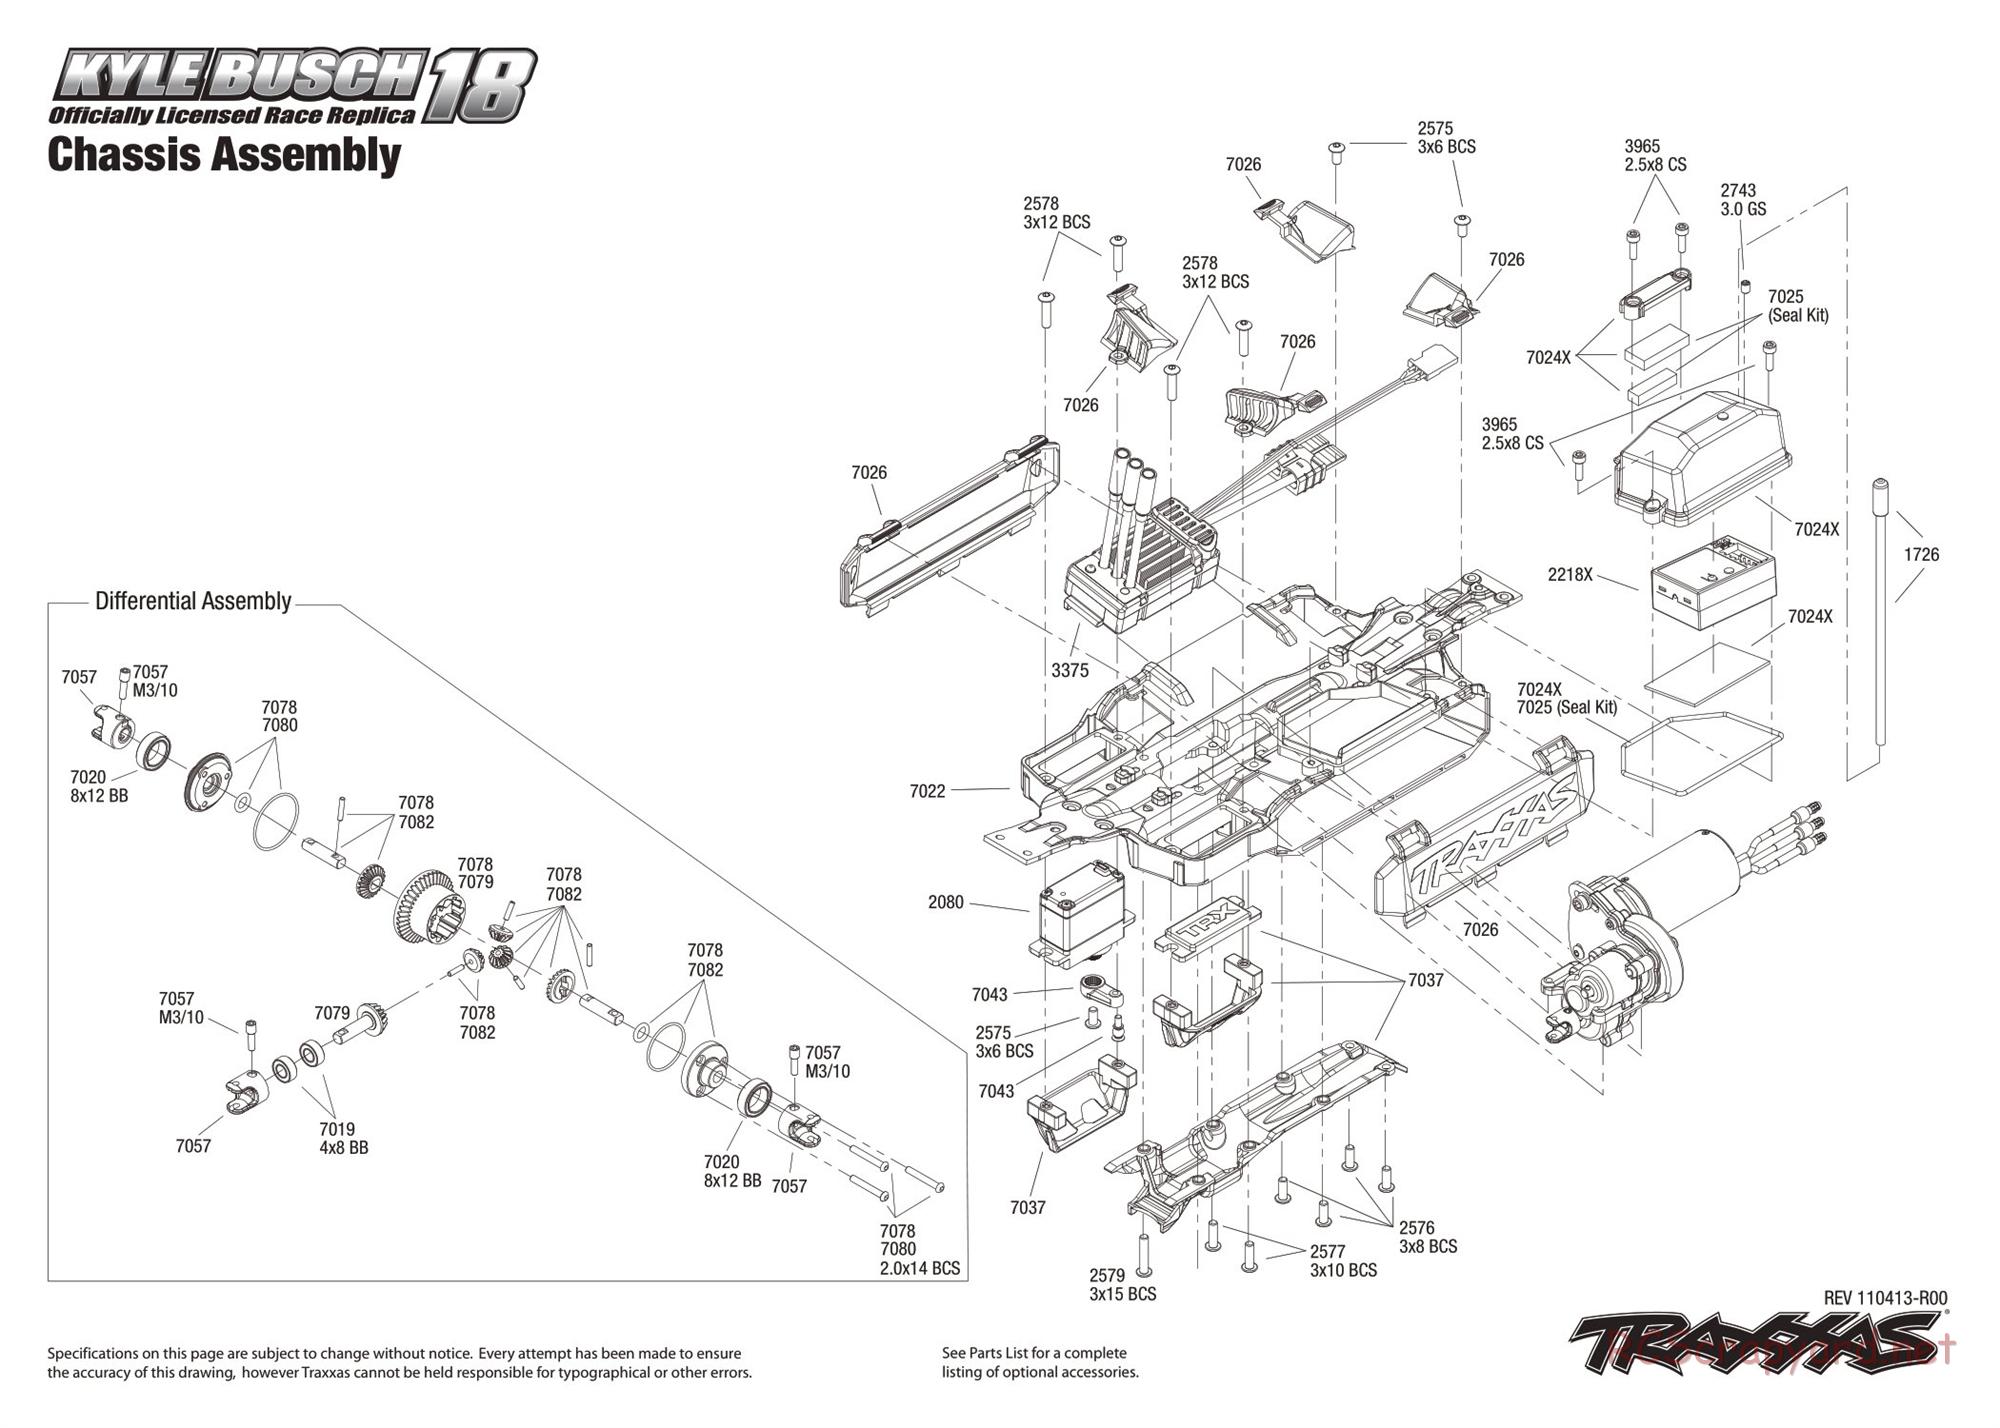 Traxxas - 1/16 Kyle Busch Race Replica (Brushless) (2011) - Exploded Views - Page 2